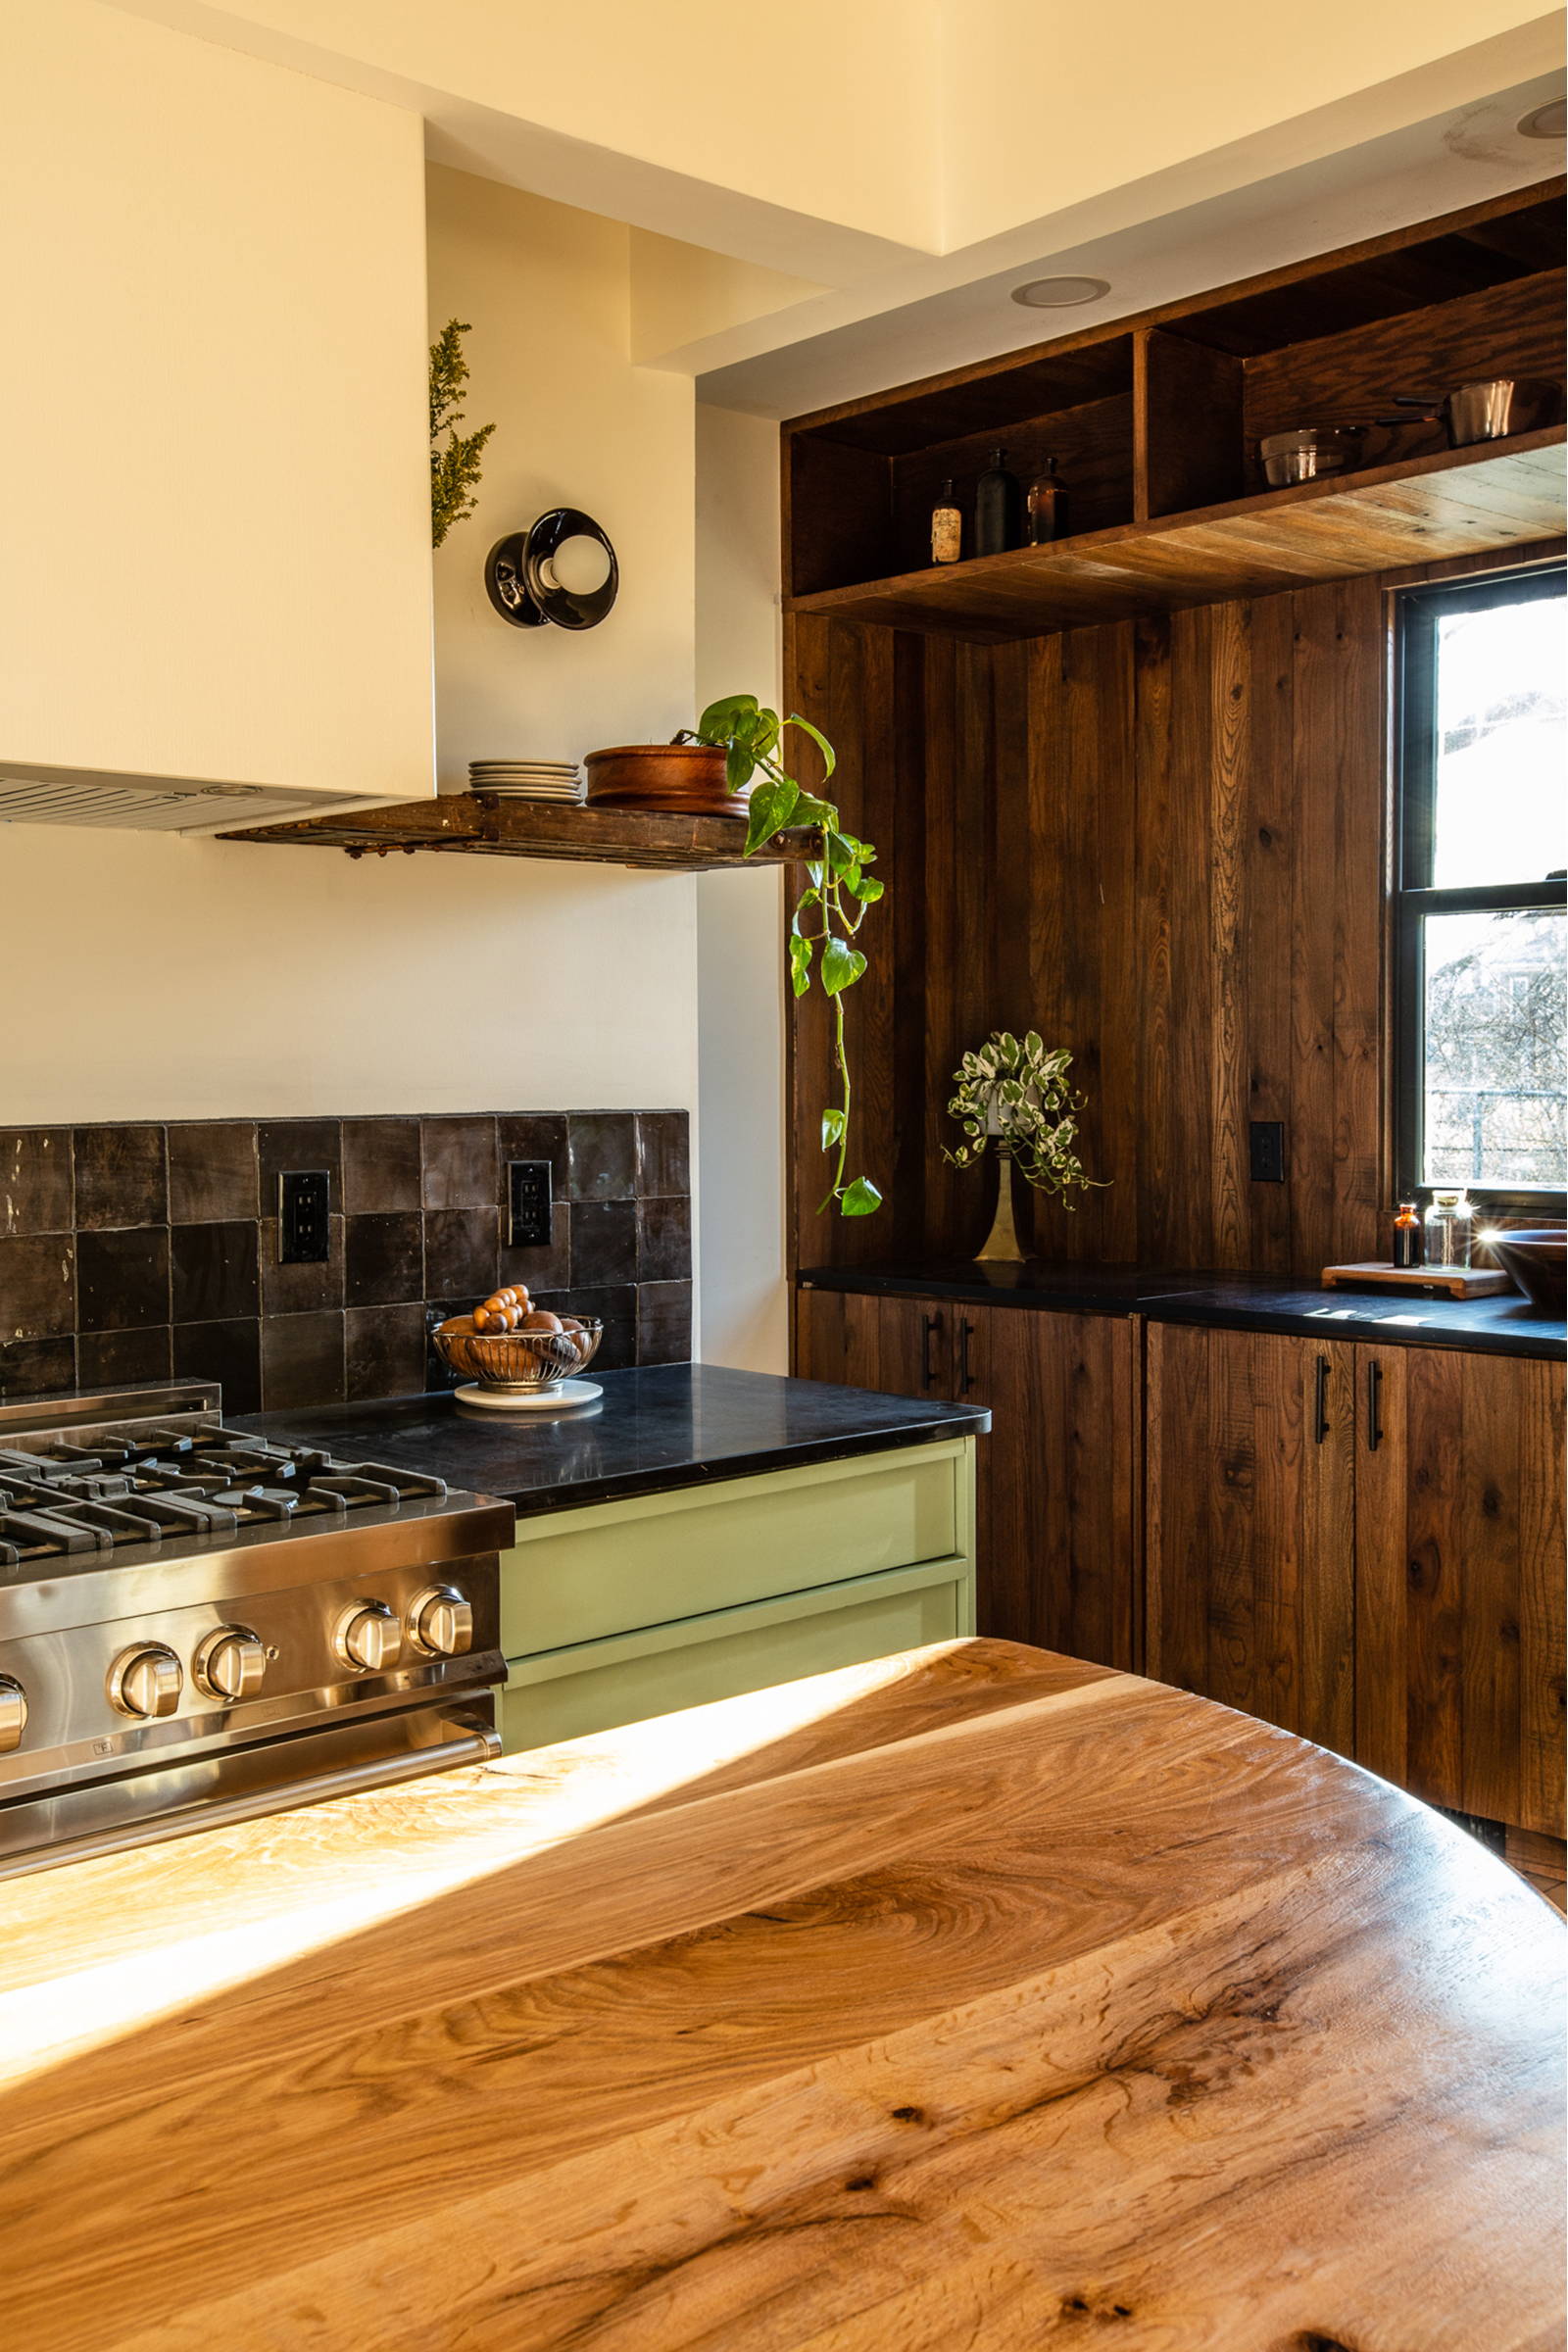 Modern kitchen interior design, featuring cabinet and wall cladding made from reclaimed wood rom Woodward Throwbacks.